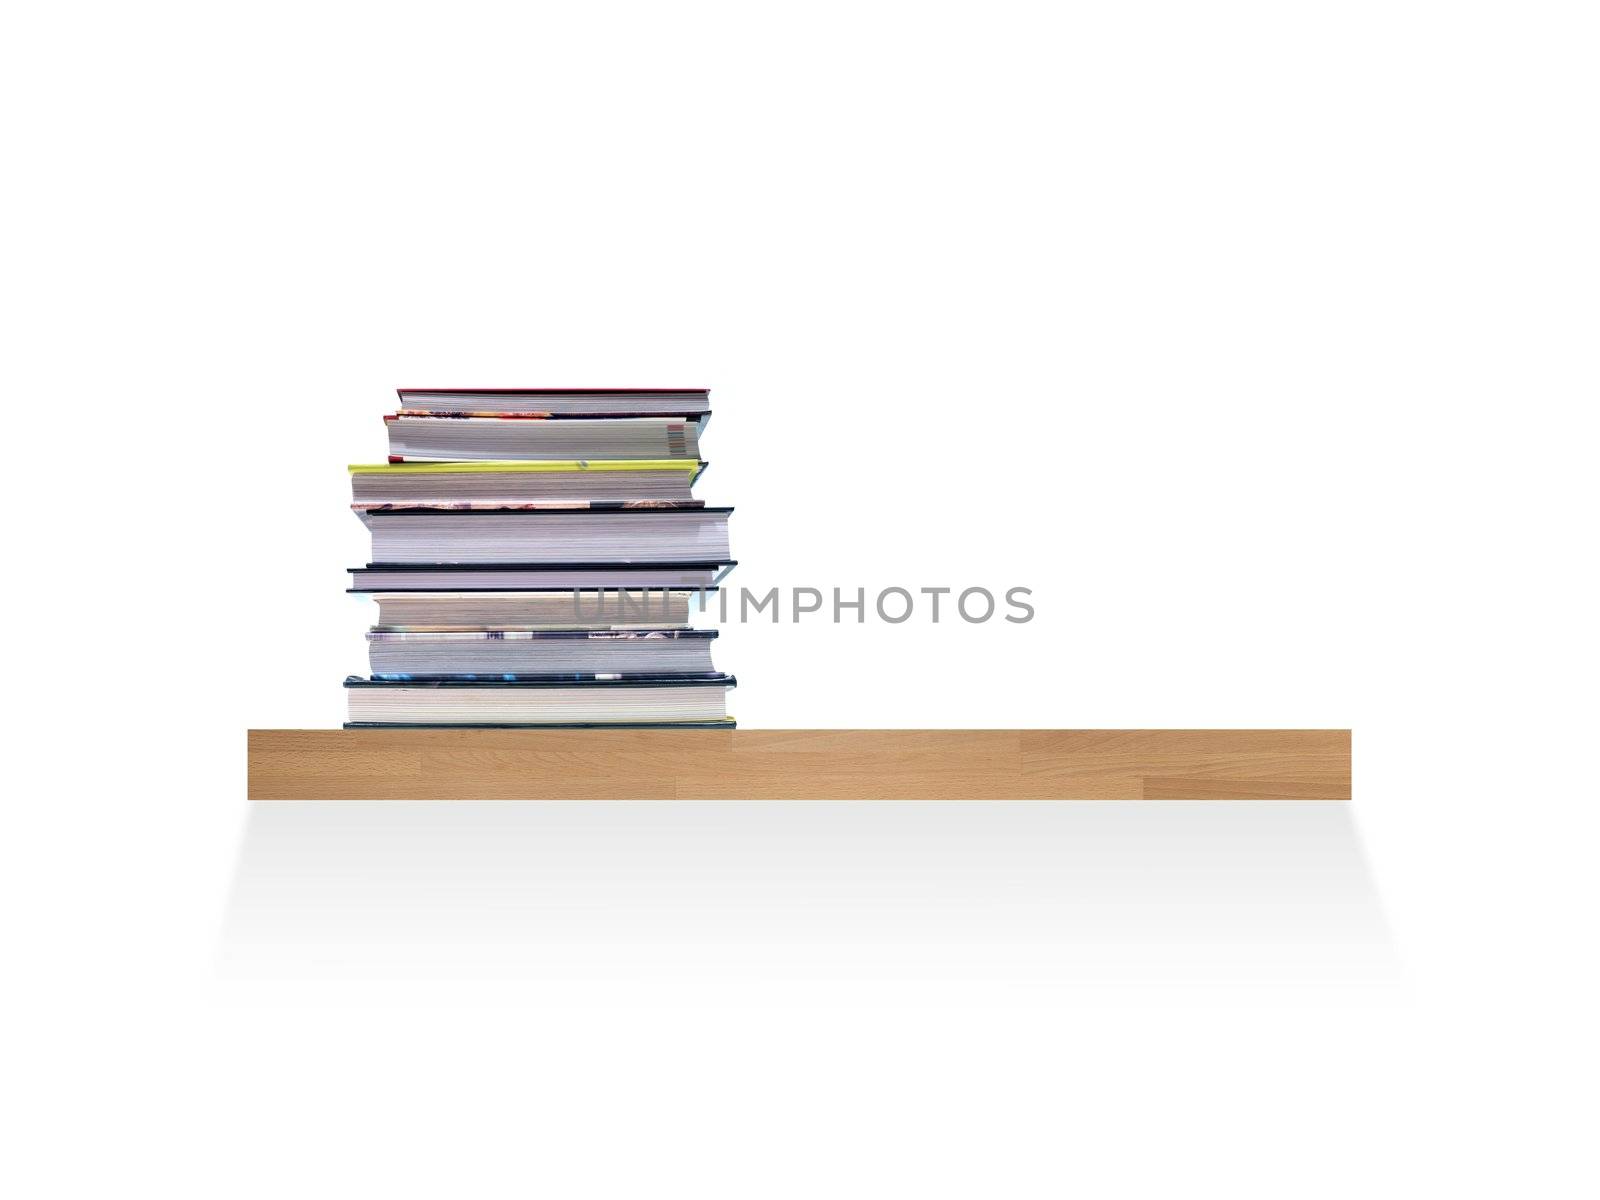 A wooden book shelve isolated against a white background